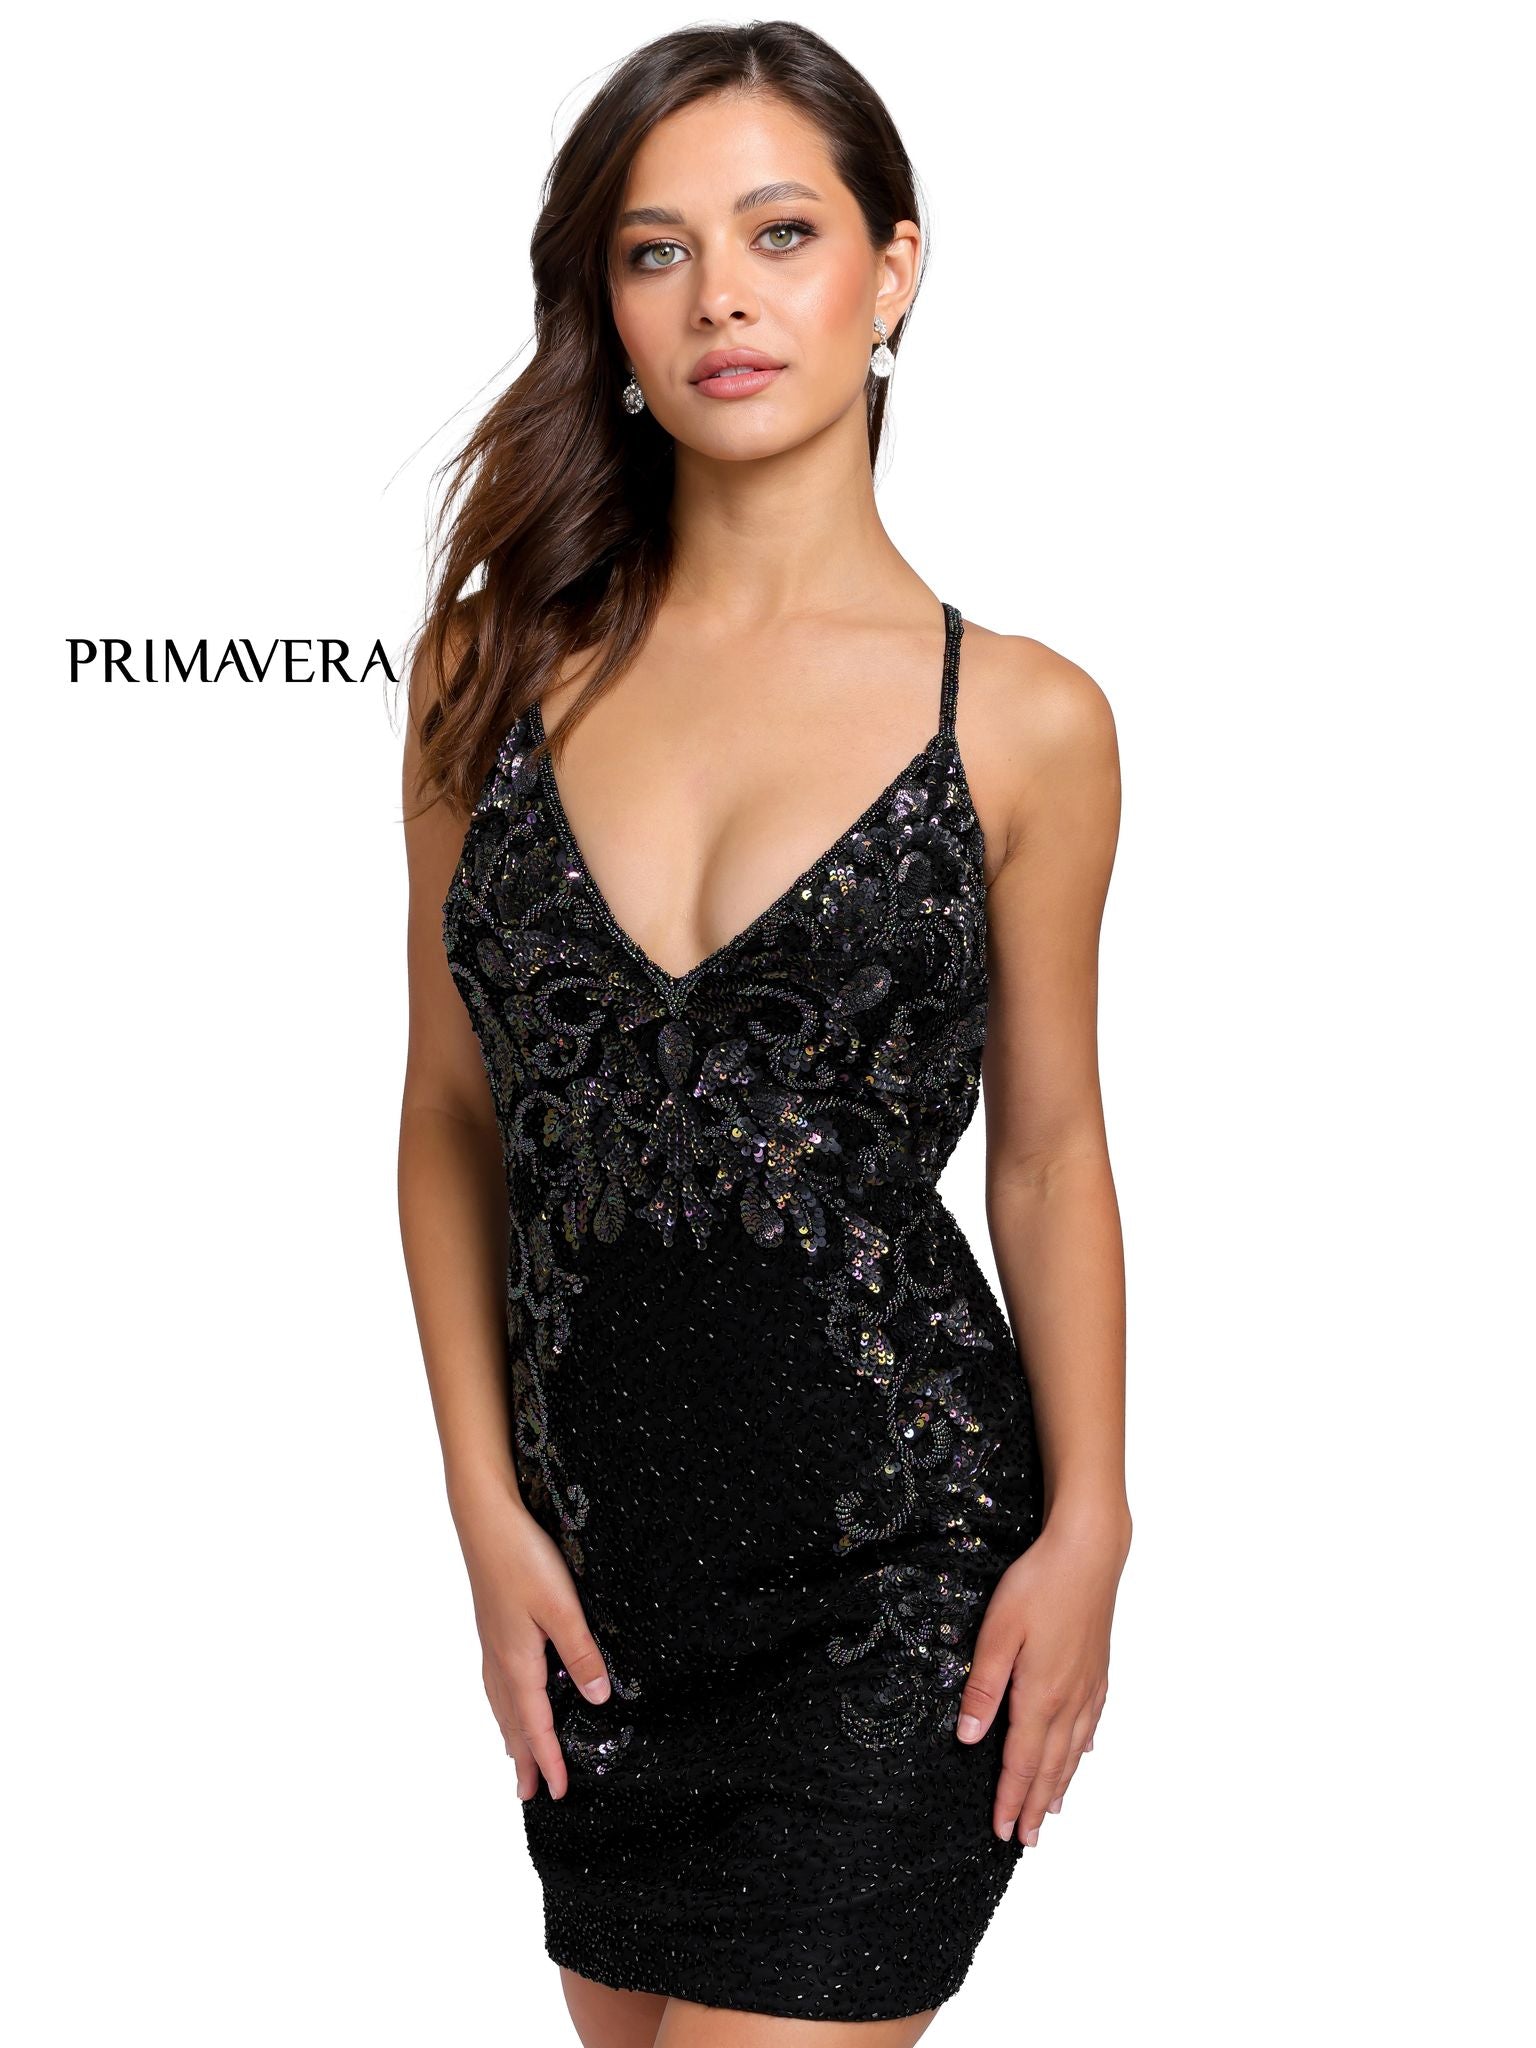 Primavera Couture 3516 Cocktail Dress. This homecoming dress has a v neckline with double cross straps in the open back It is short, fitted, and the fabric is sequins. The back has multiple straps that come together in a beautiful backless fashion.  This would make an excellent reception dress in Ivory.   Available colors:  Black  Available sizes:  2